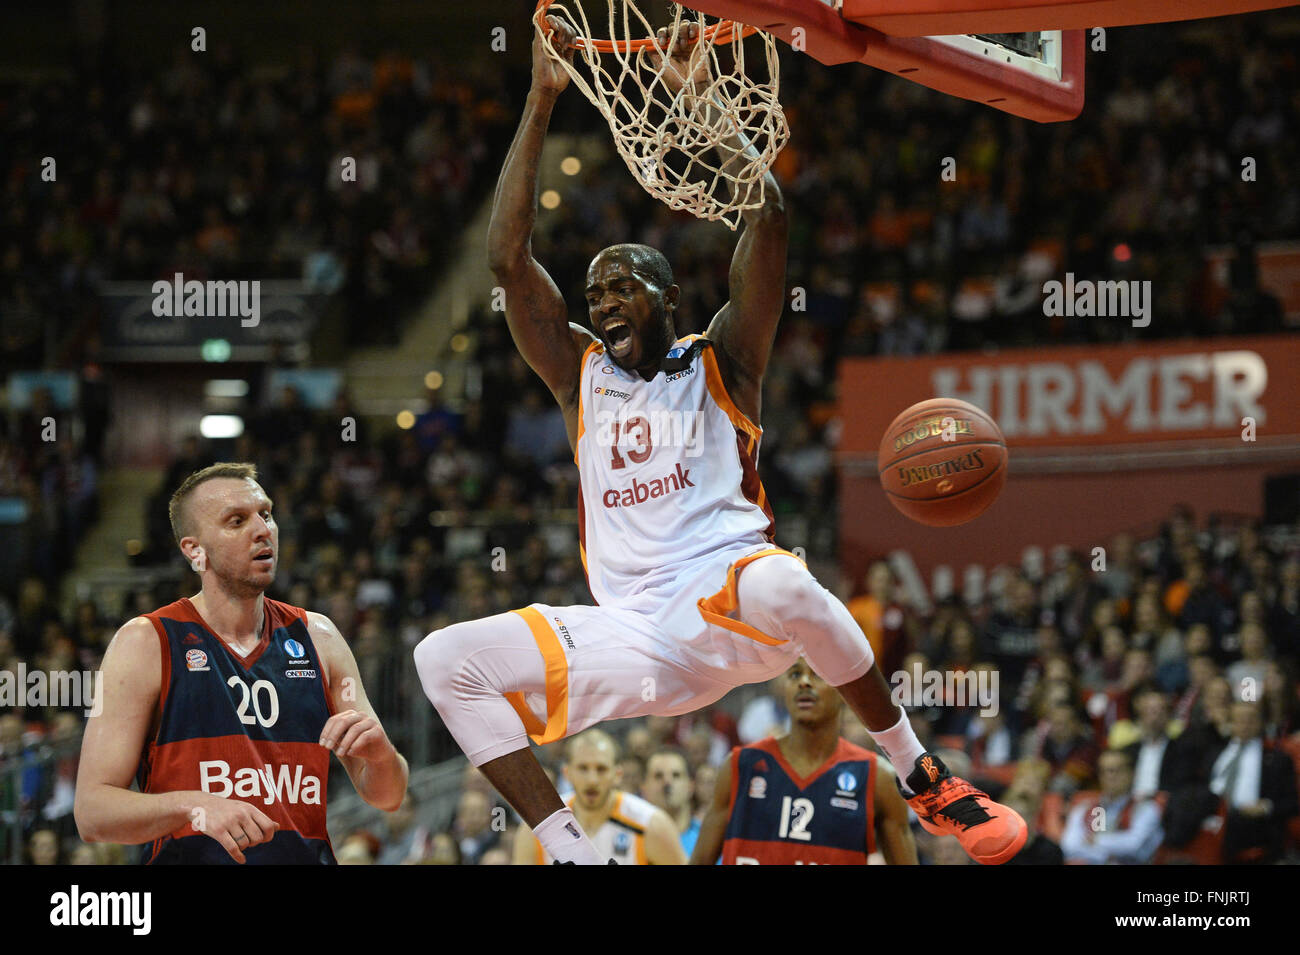 Munich, Germany. 15th Mar, 2016. Galatasaray's Stephane Lasme celebrates a  layup during the Eurocup quarter final first leg basketball match between Bayern  Munich and Galatasaray S.K. at the Audi Dome in Munich,